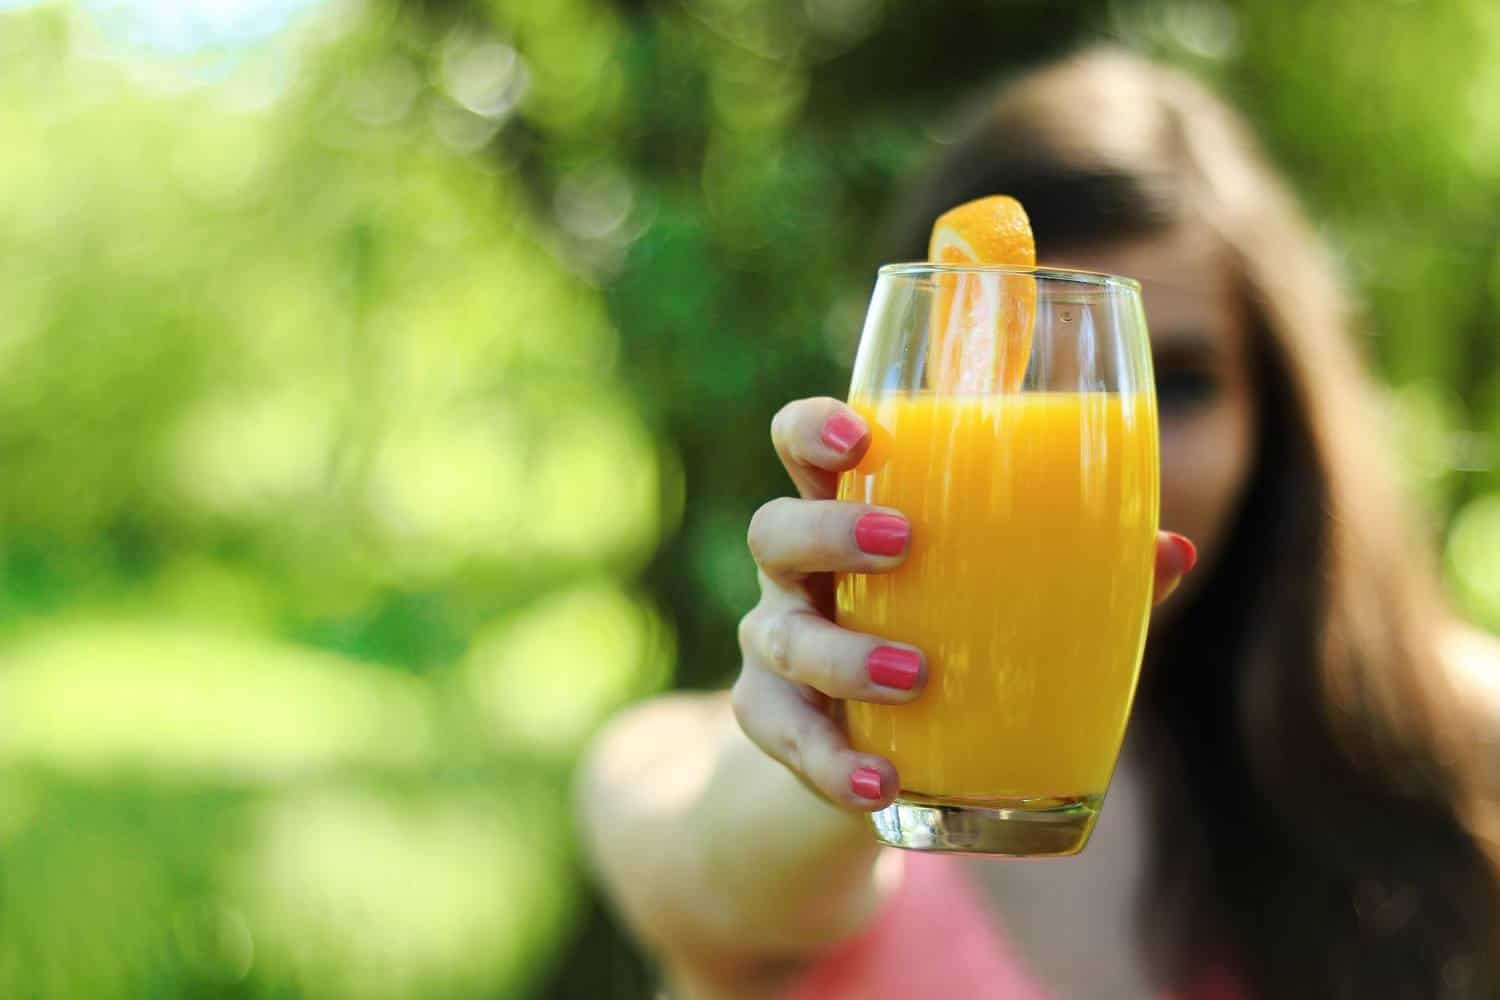 A girl holding a glass of orange juice.